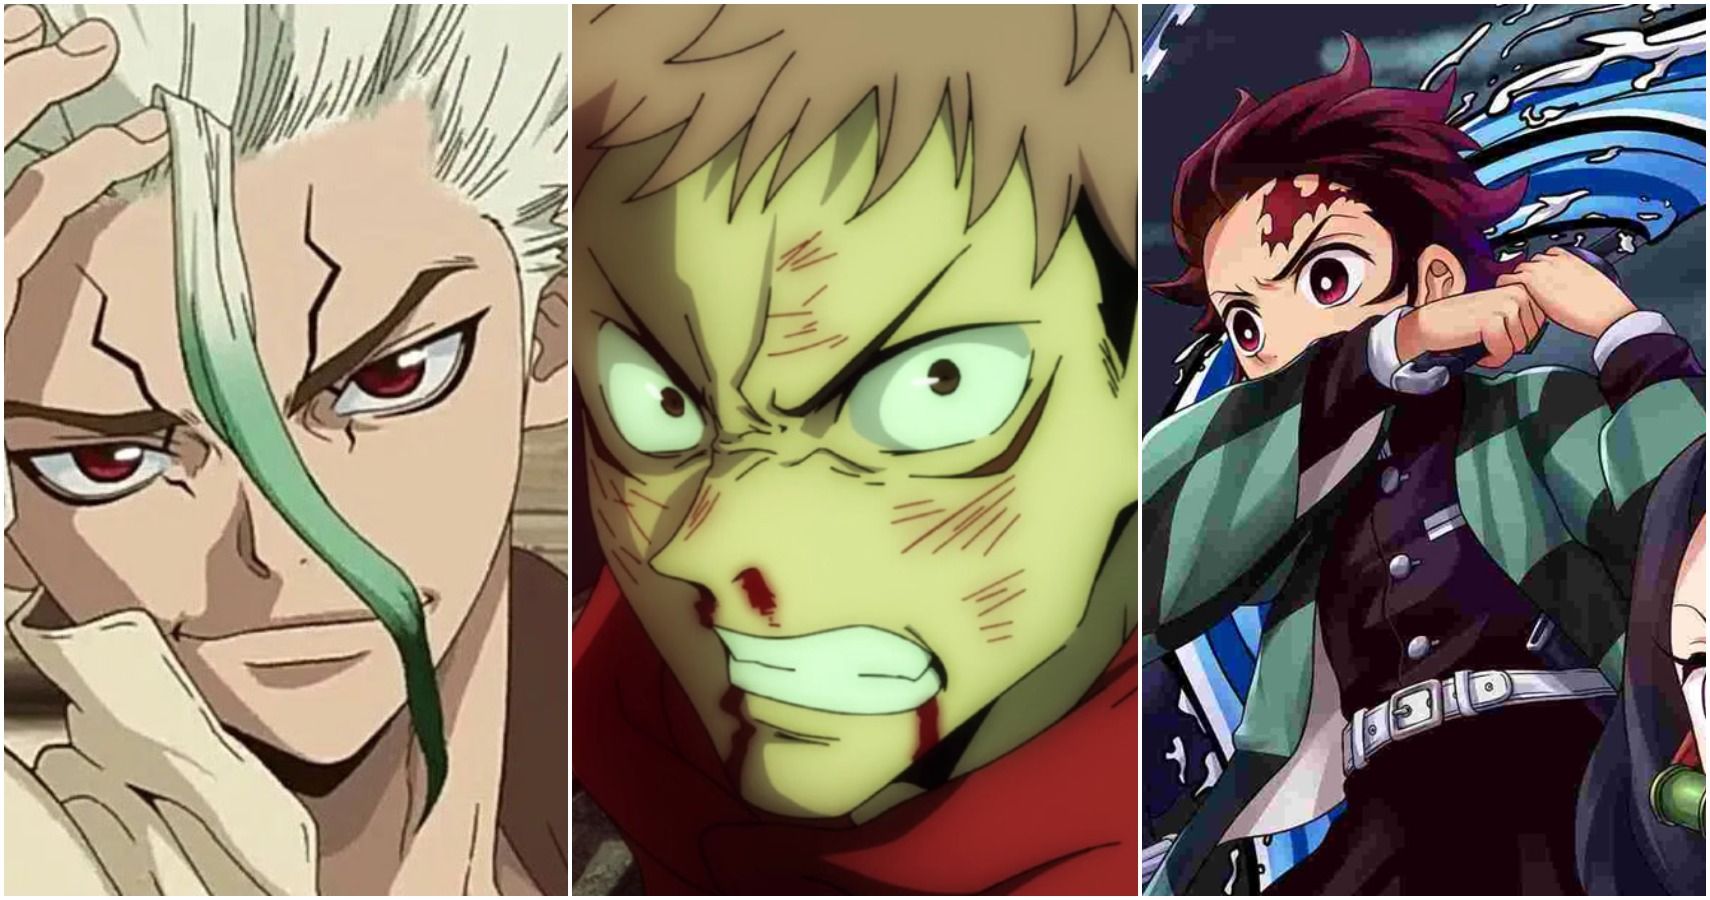 Jujutsu Kaisen and the New Action Shonen - I drink and watch anime